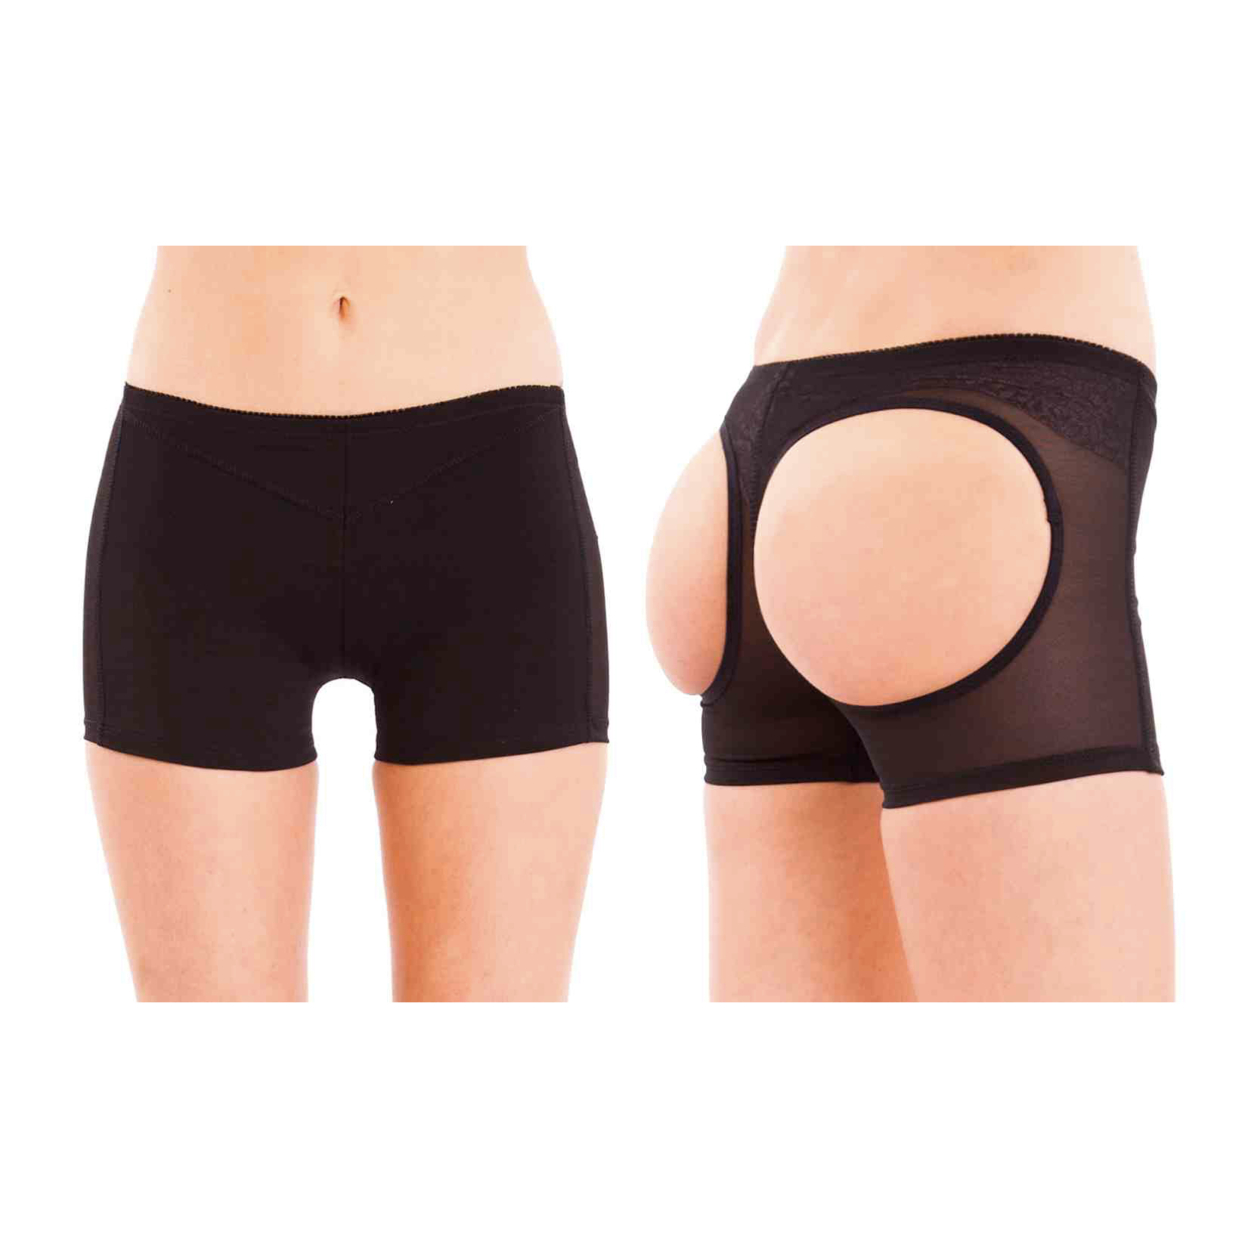 Women's Butt-Lifting And Tummy-Control Brief - Black, L